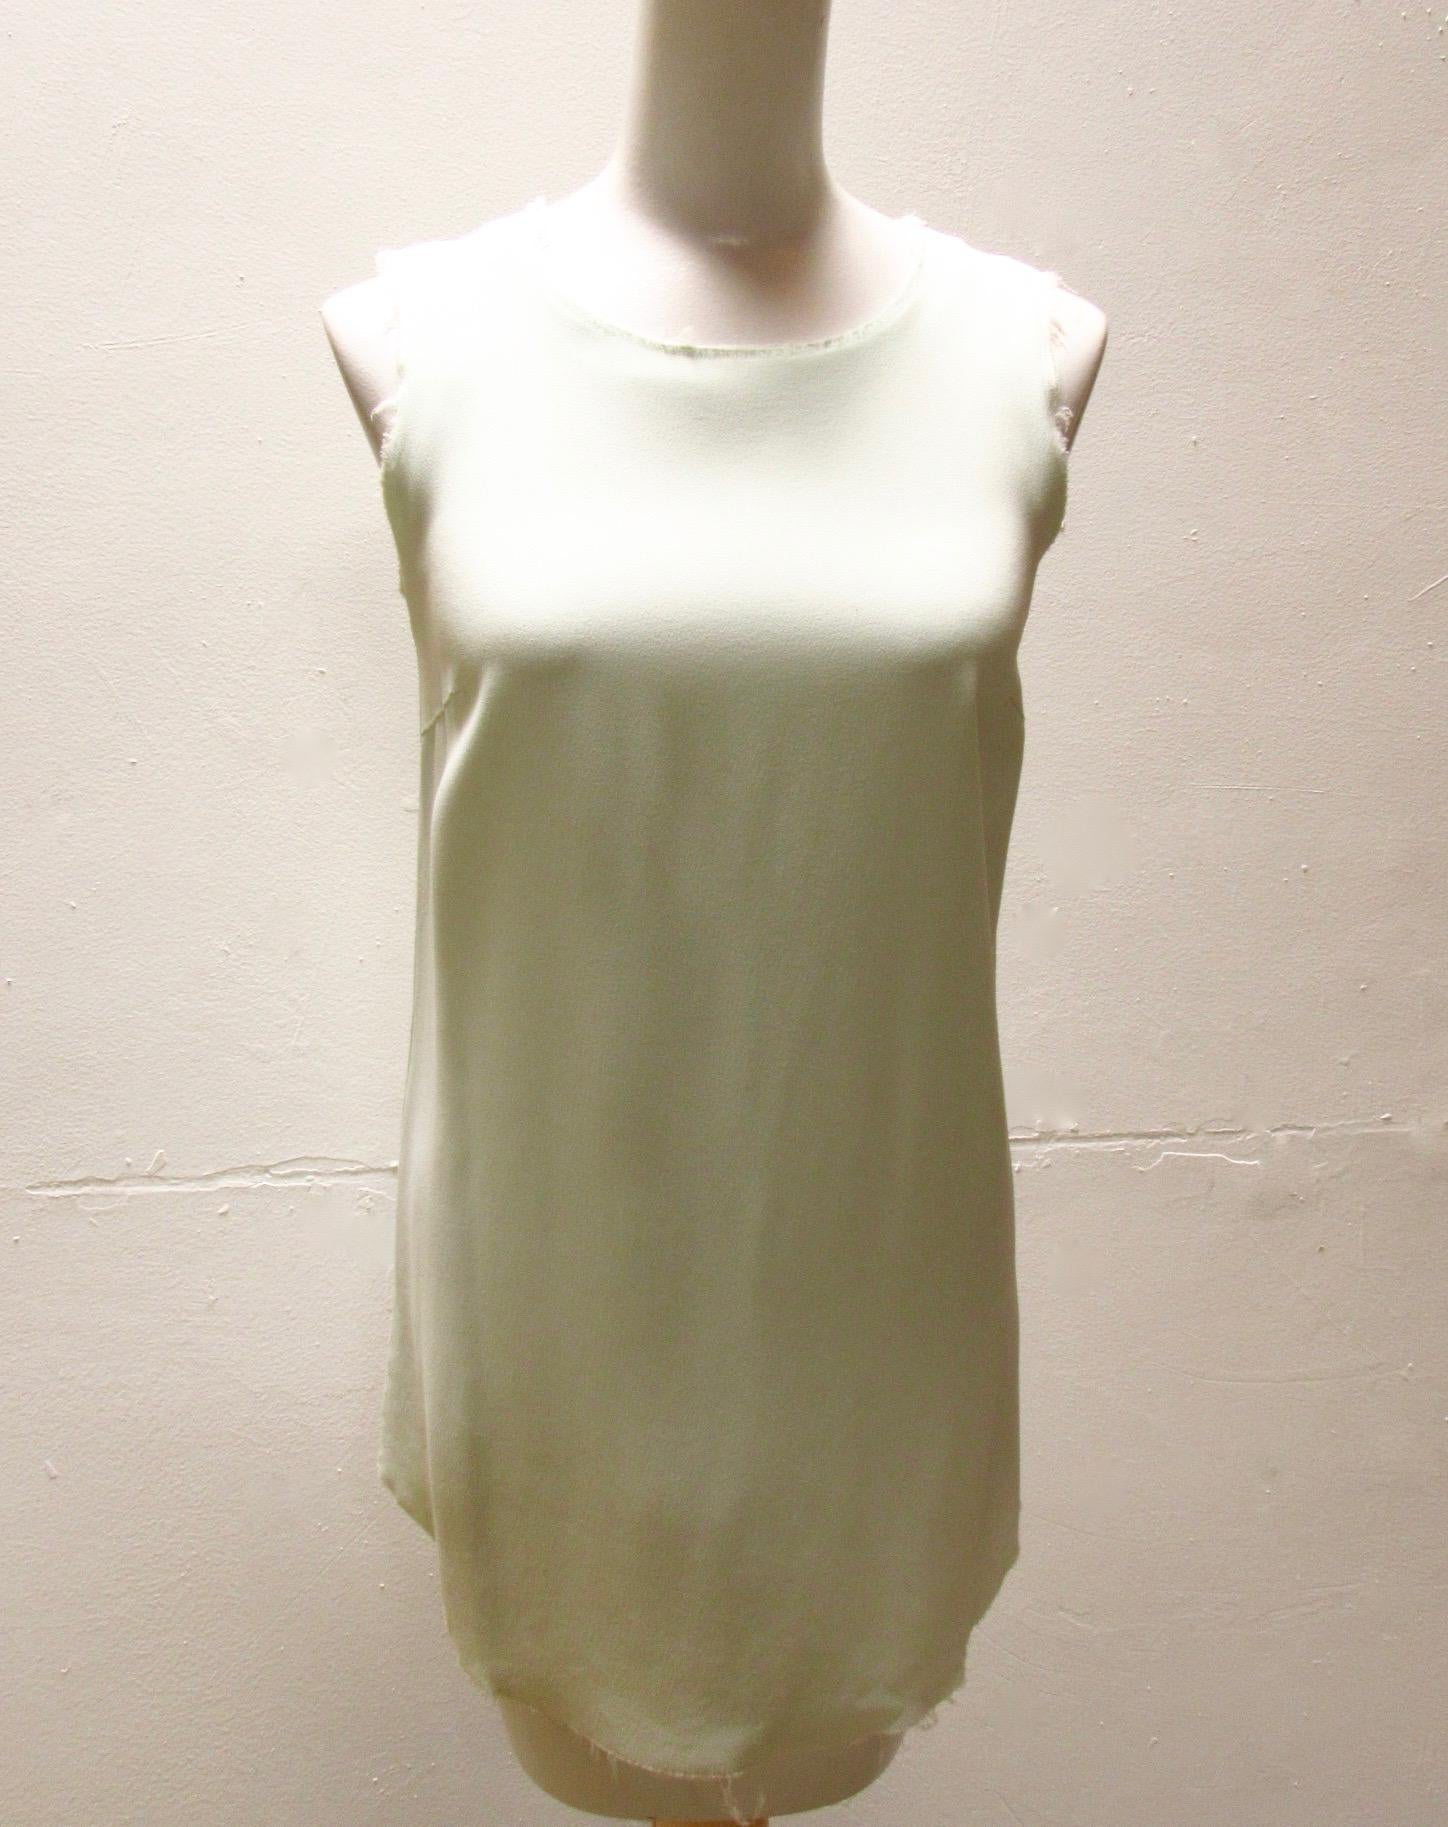 Mint green deconstructed top from Maison Martin Margiela Archive. This 20th century top features a round neck, a keyhole back with a single button closure at the nape, and frayed edges throughout. Has a longer round front hem. 